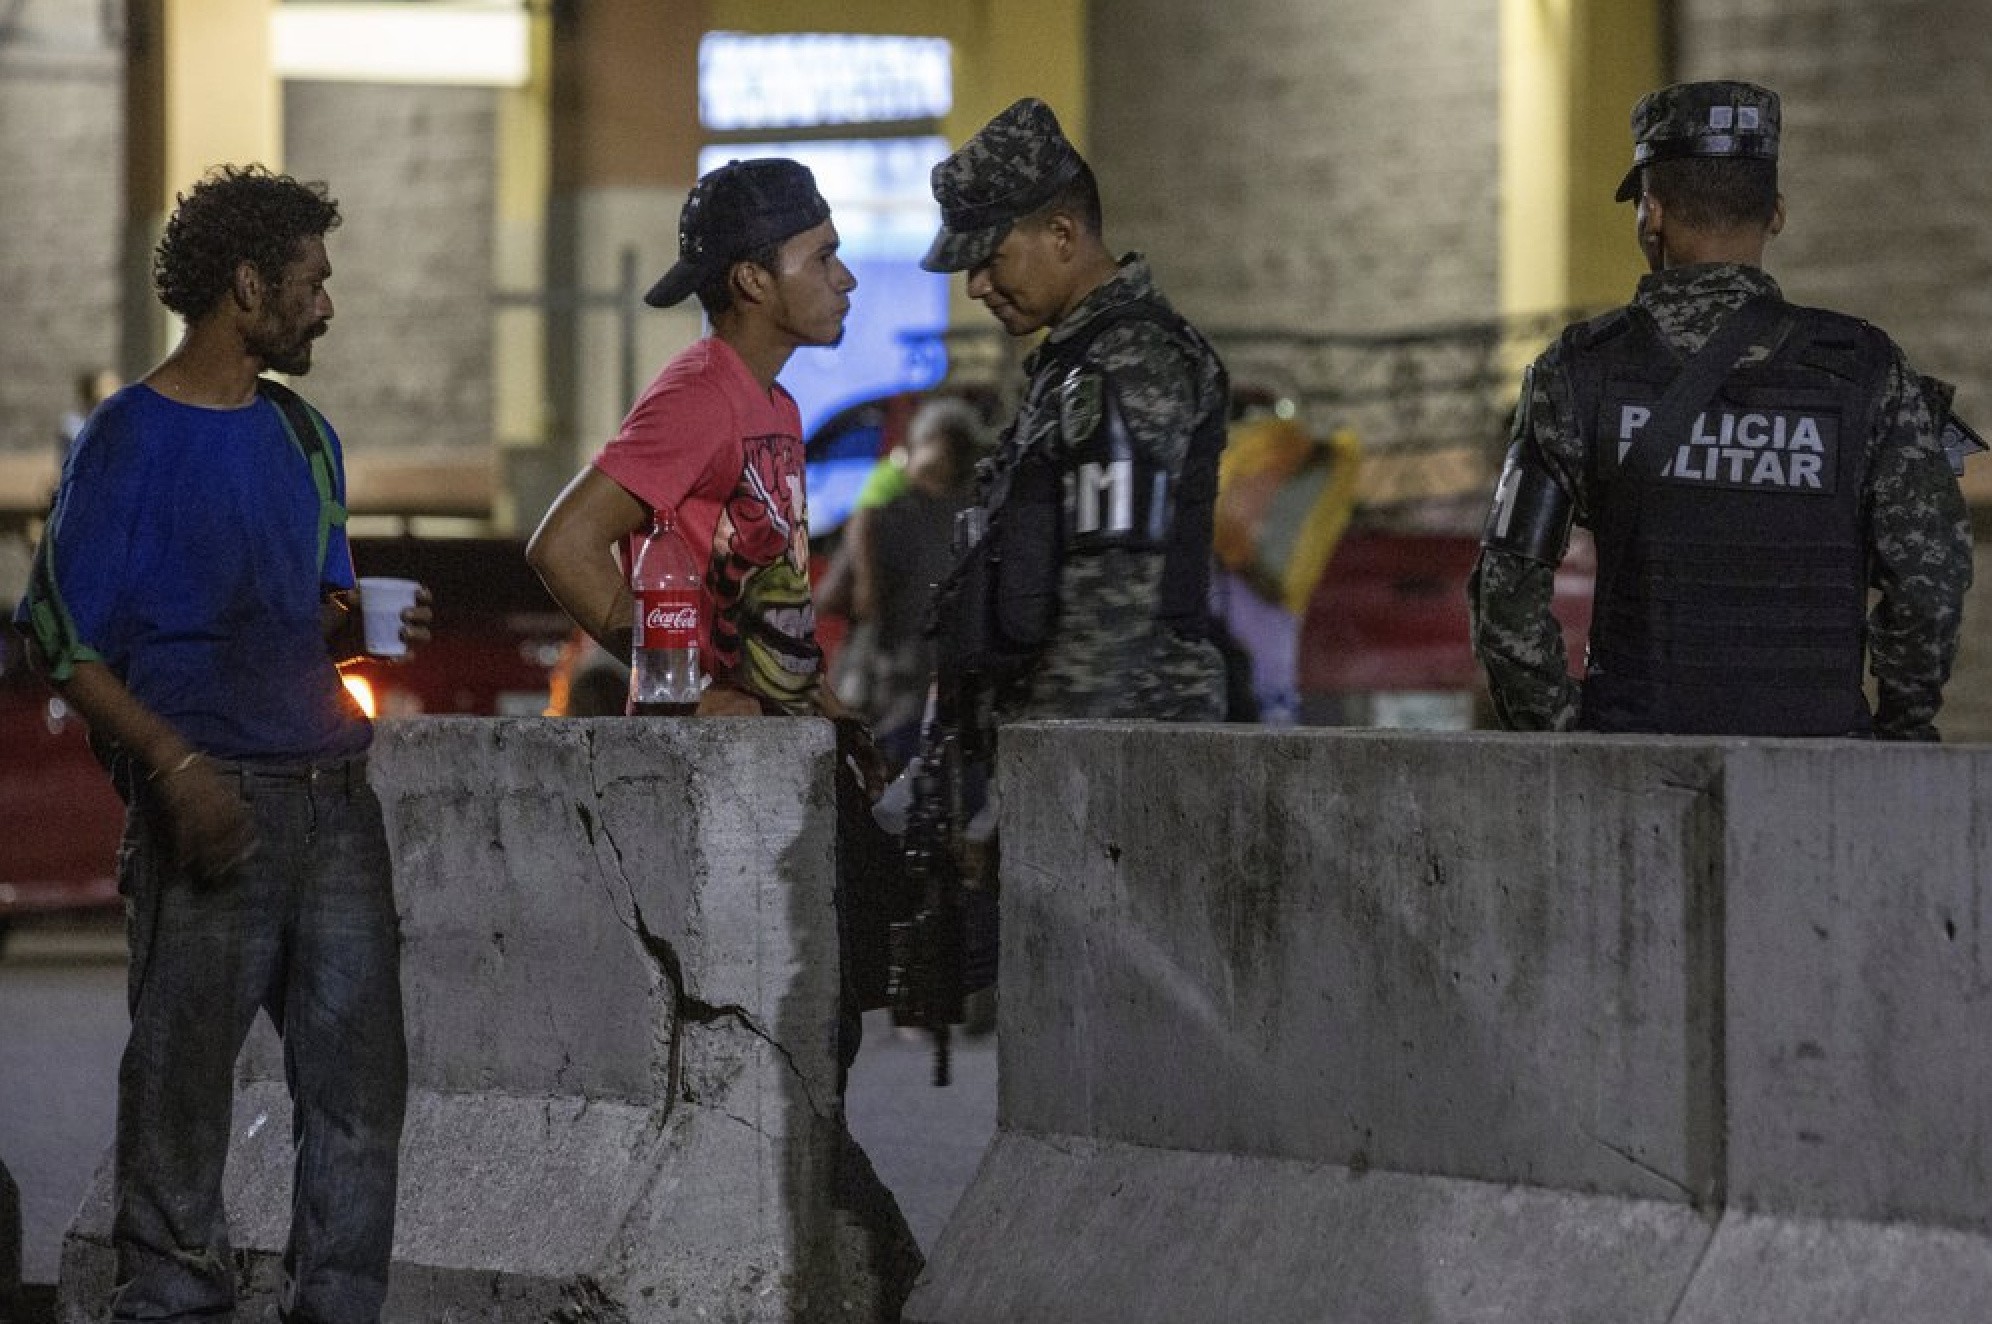 Military police patrol the main bus station in San Pedro Sula, Honduras, on Nov. 28, 2019. Until a few months ago, the bus station was crowded with migrants heading north towards the U.S. Now many buses leave with just a few passengers. Image by Moises Castillo/ AP Photo. Honduras, 2019.